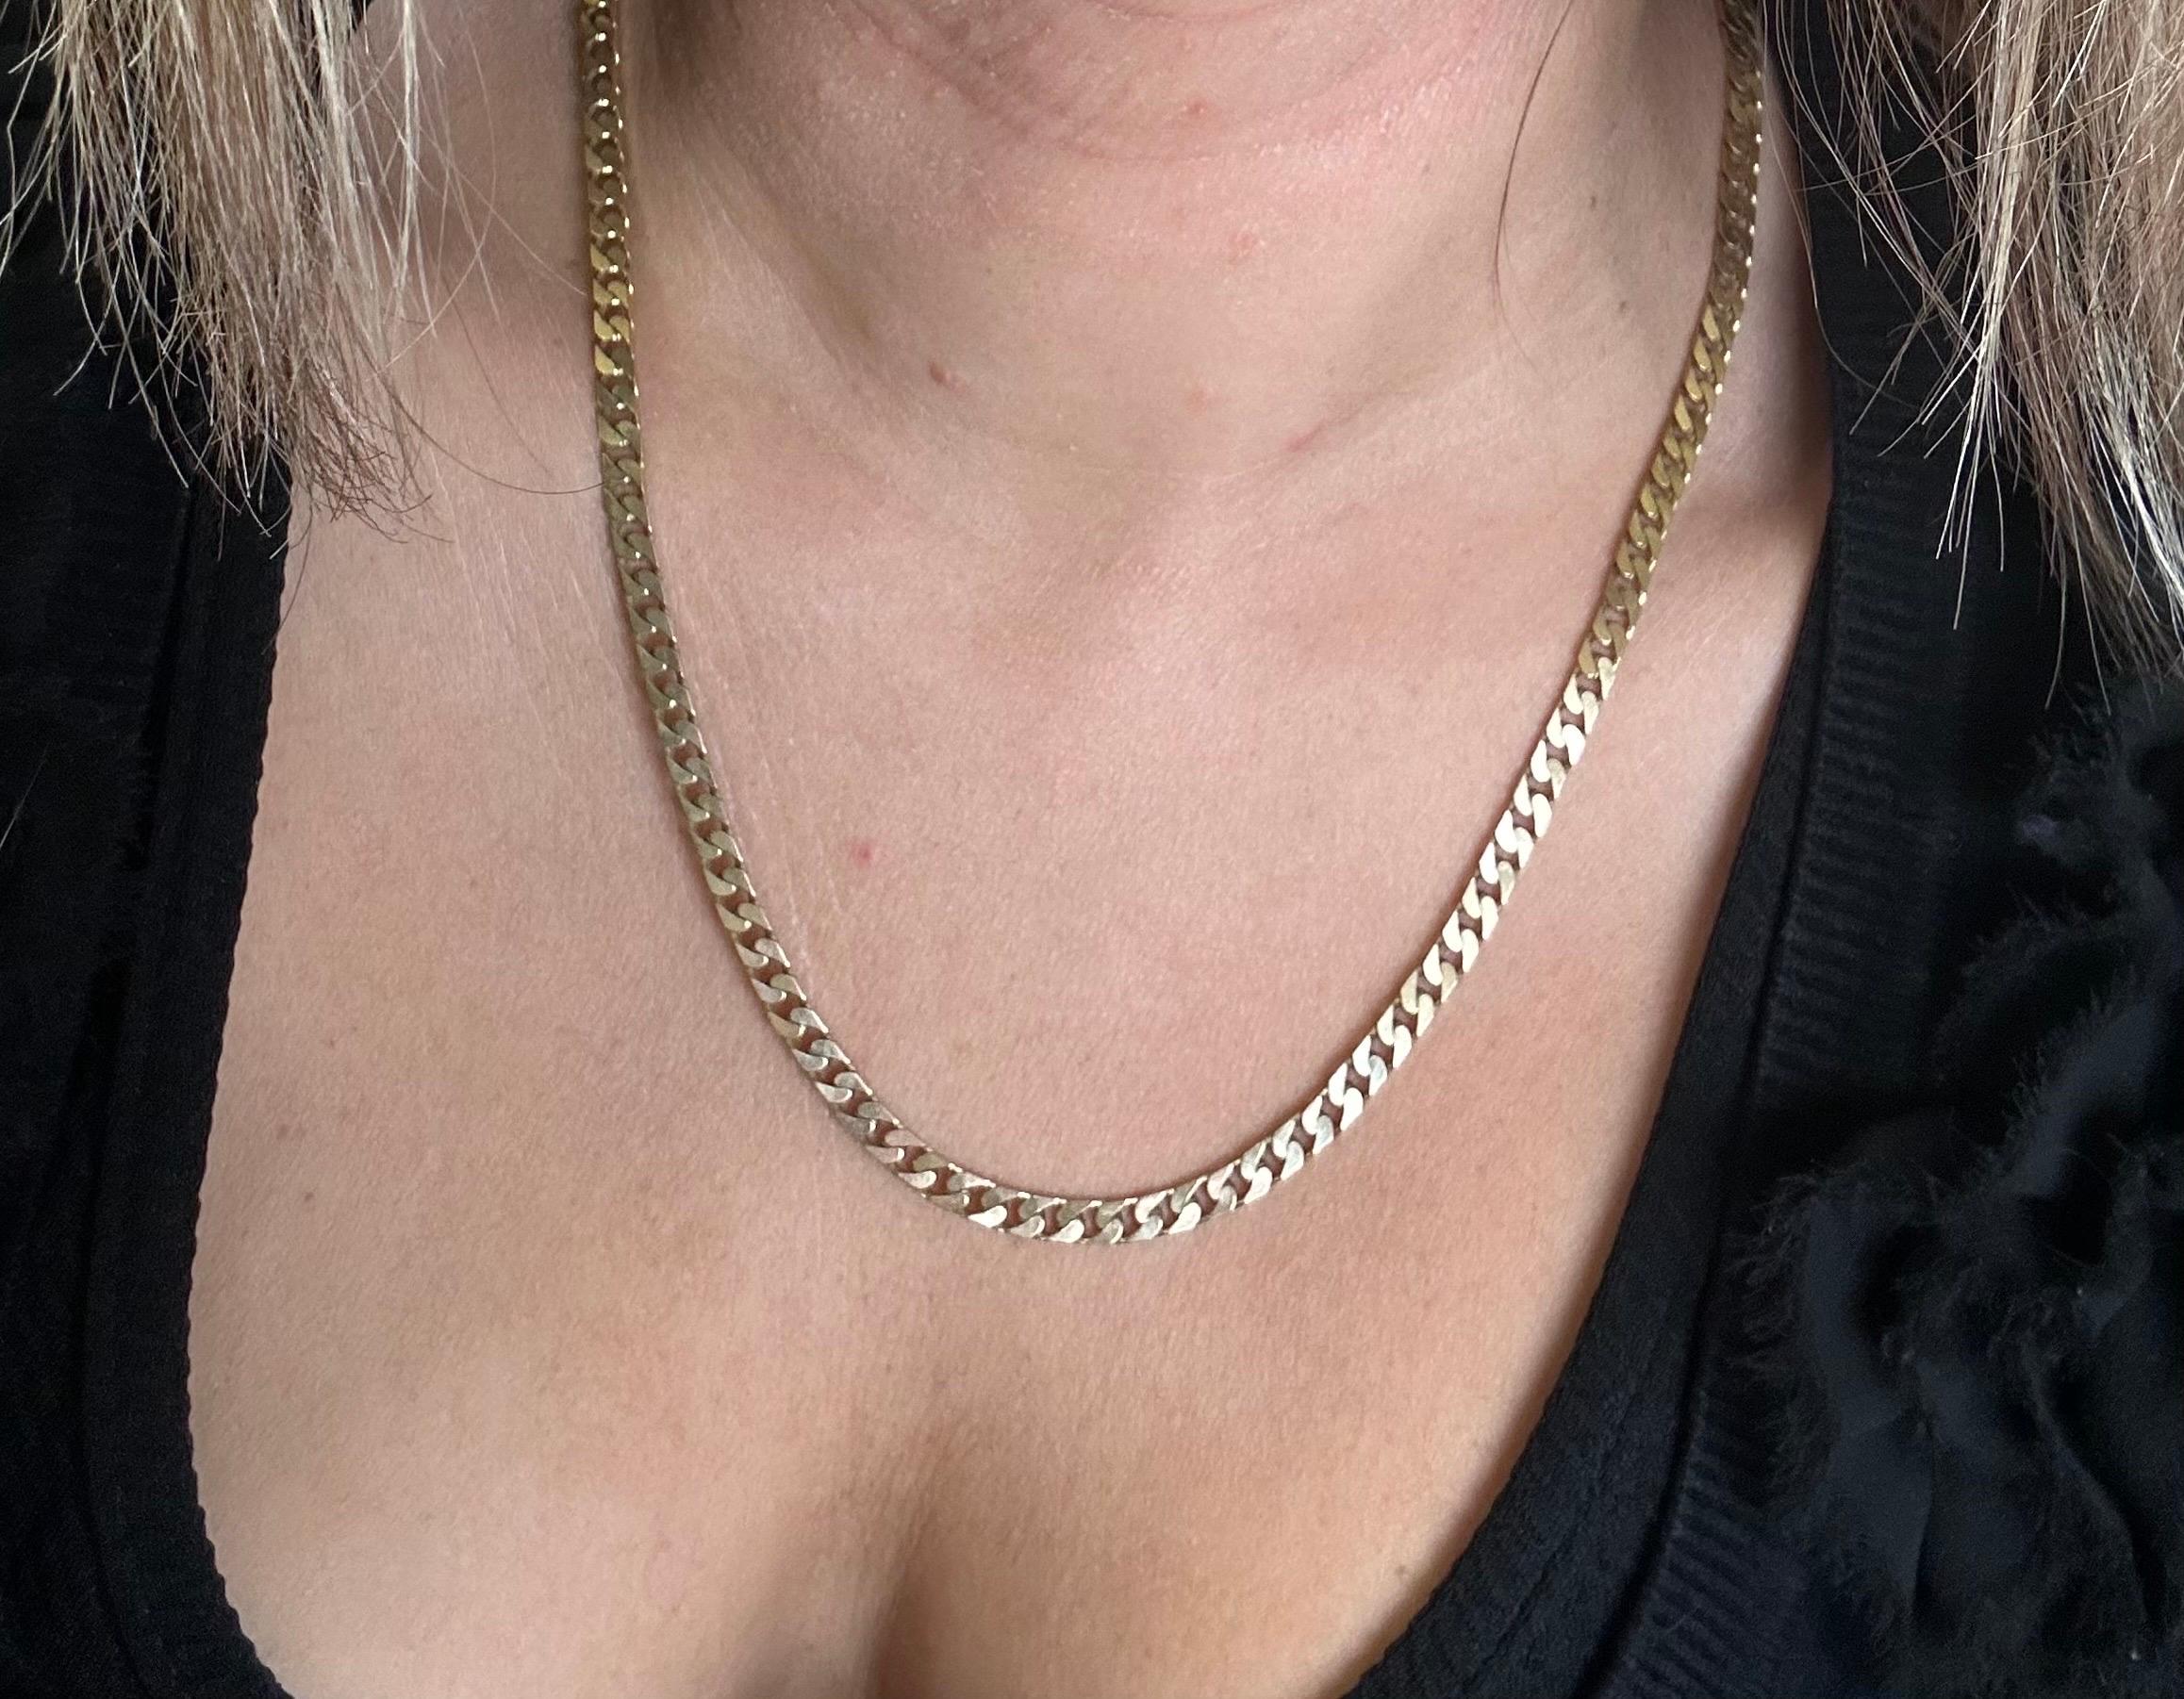 Unisex solid gold chain, 23.33 grams, 4mm width and 22